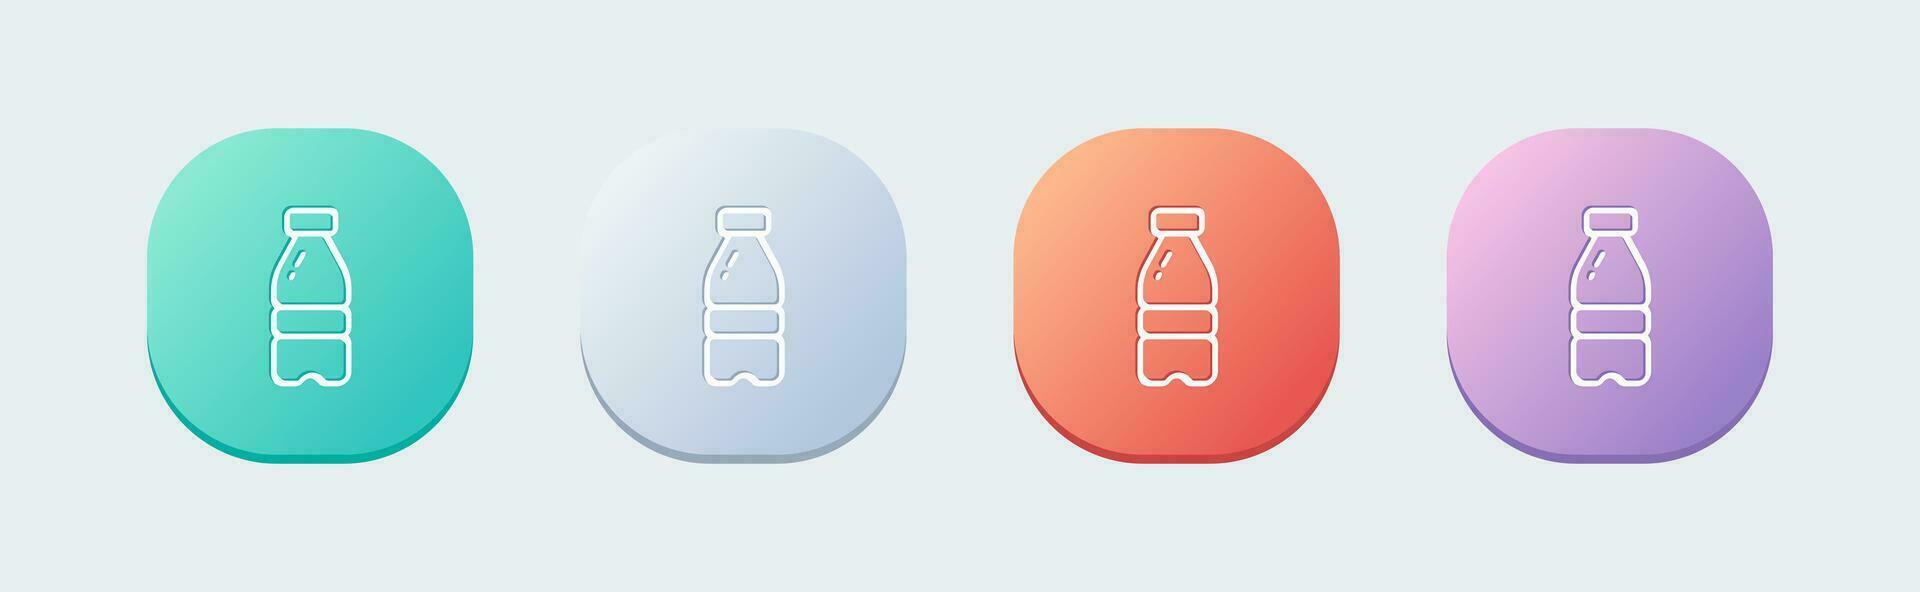 Bottle line icon in flat design style. Water drink signs vector illustration.